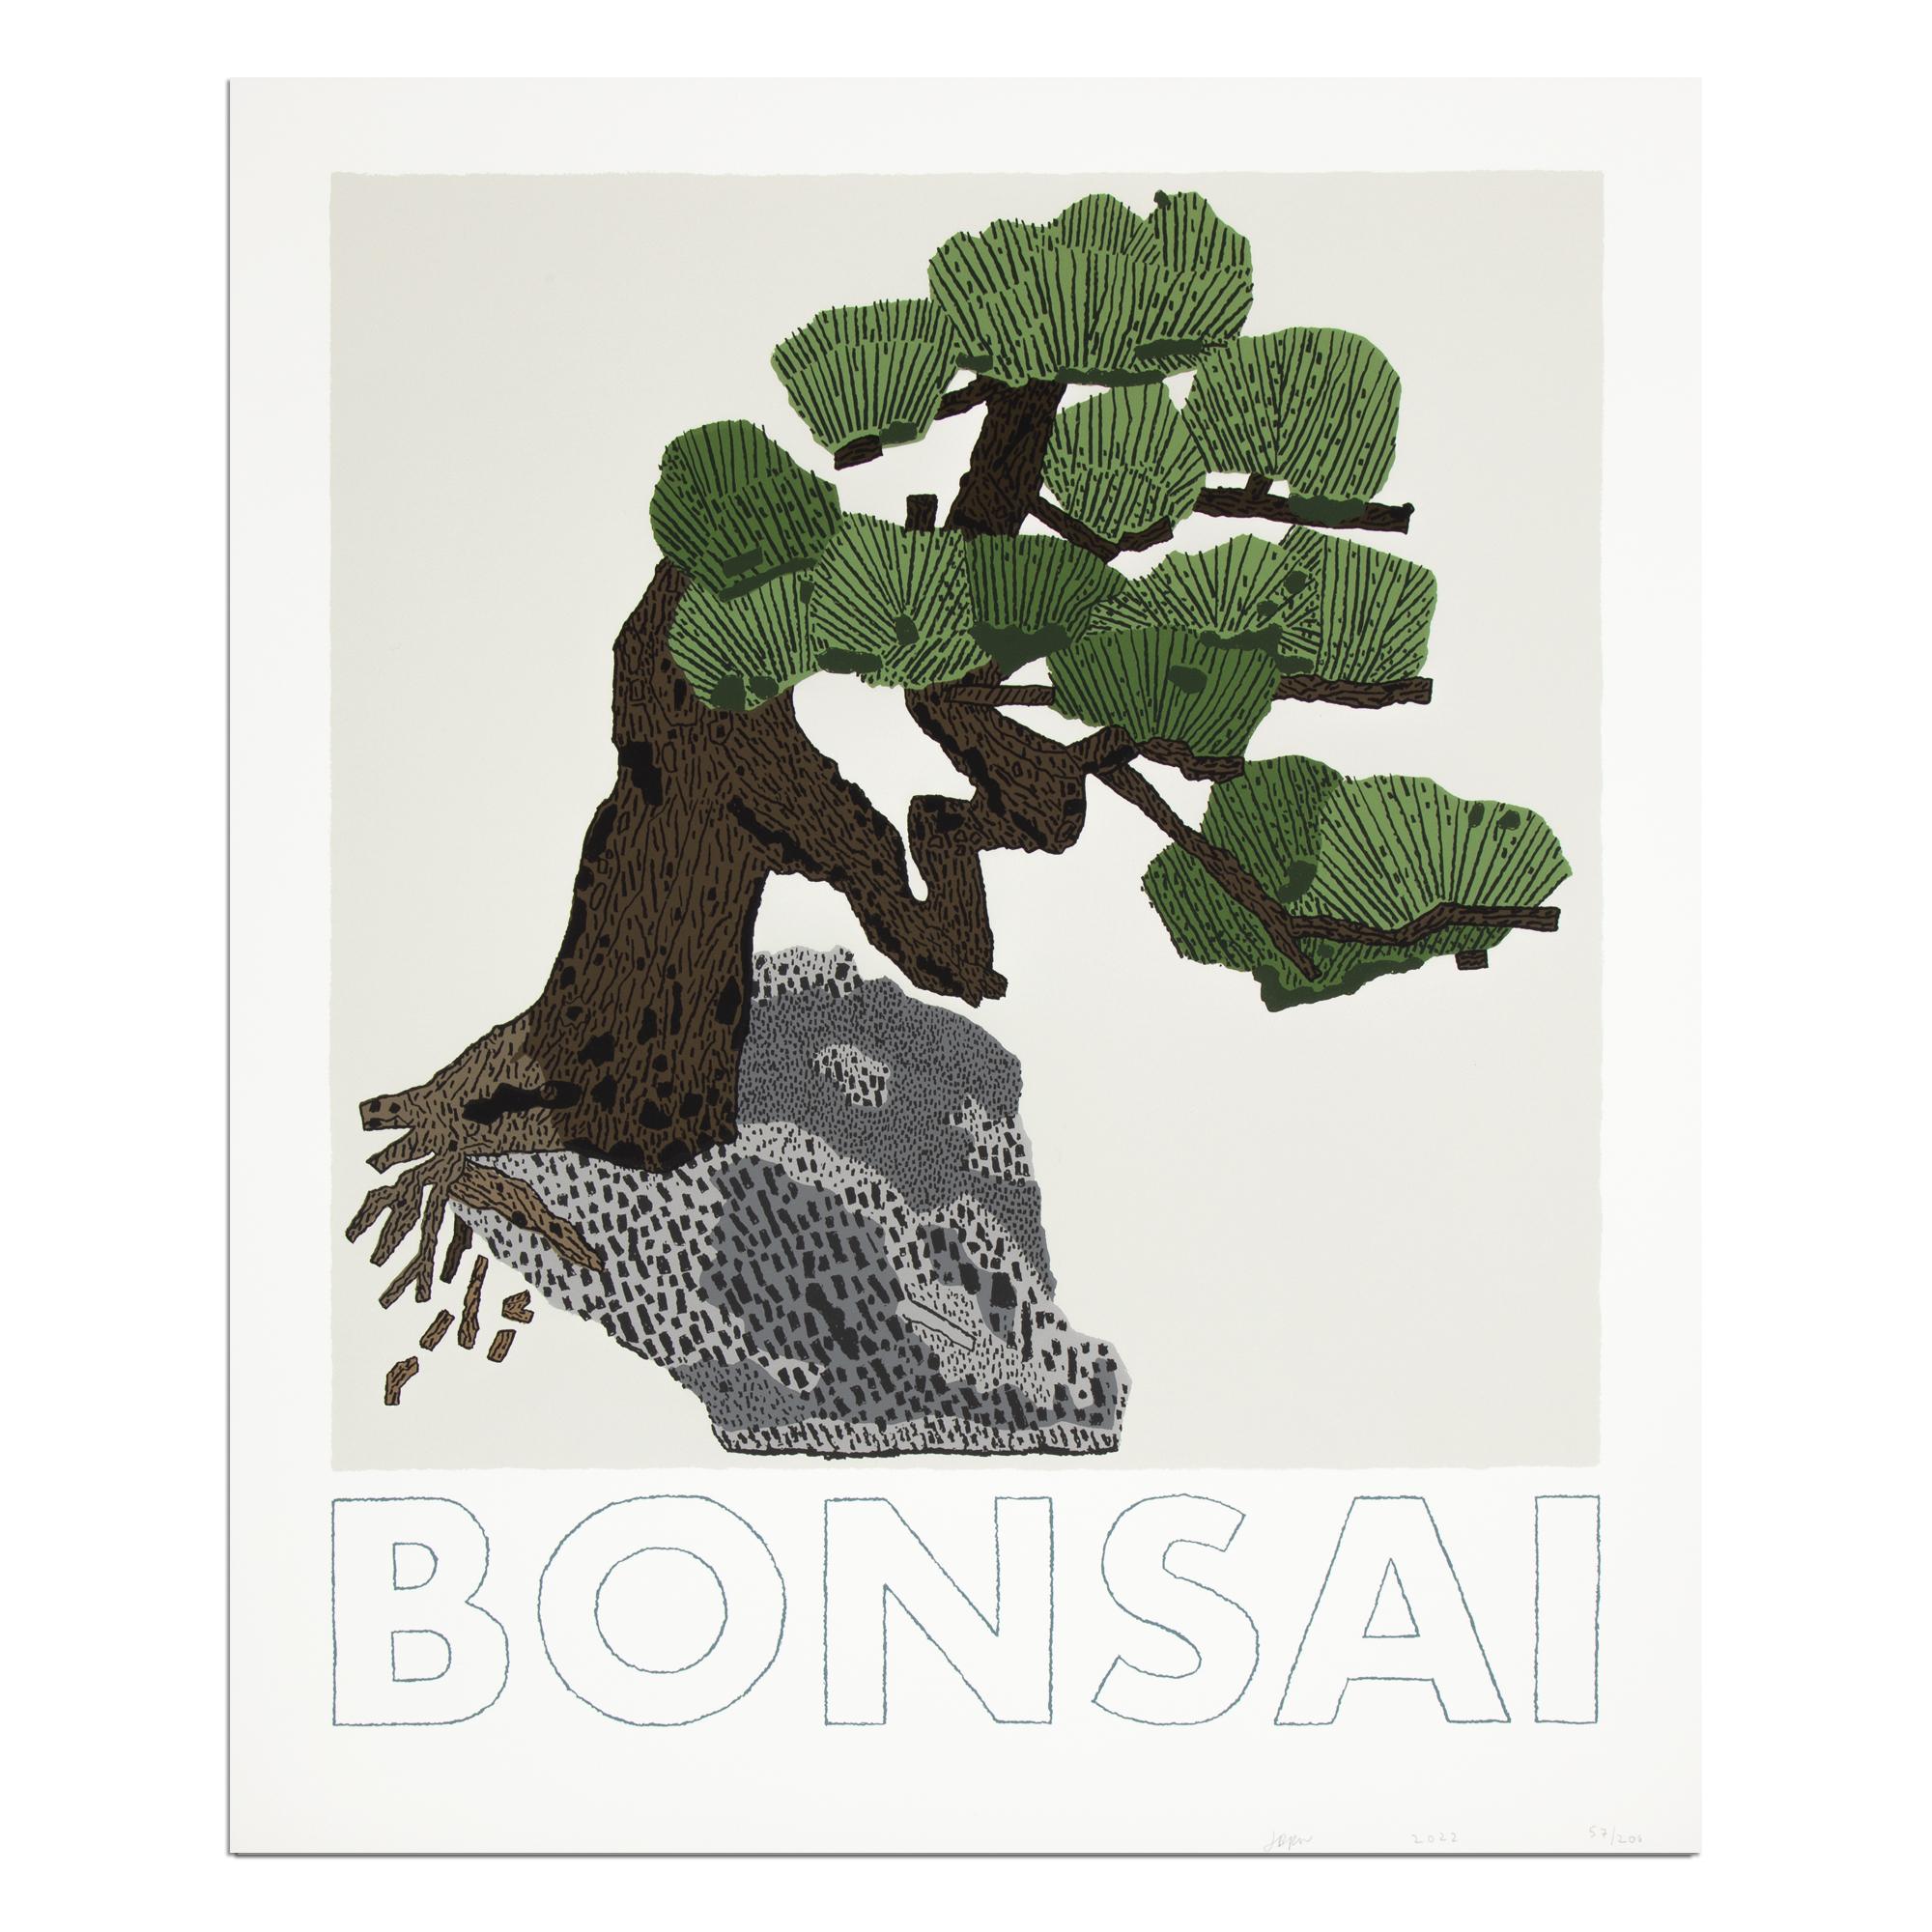 Jonas Wood (American, b. 1977)
Bonsai, 2021
Medium: 13-color screen print on rising museum board
Dimensions: 71.1 × 58.4 cm (28 × 23 in)
Edition of 200: Hand-signed and numbered